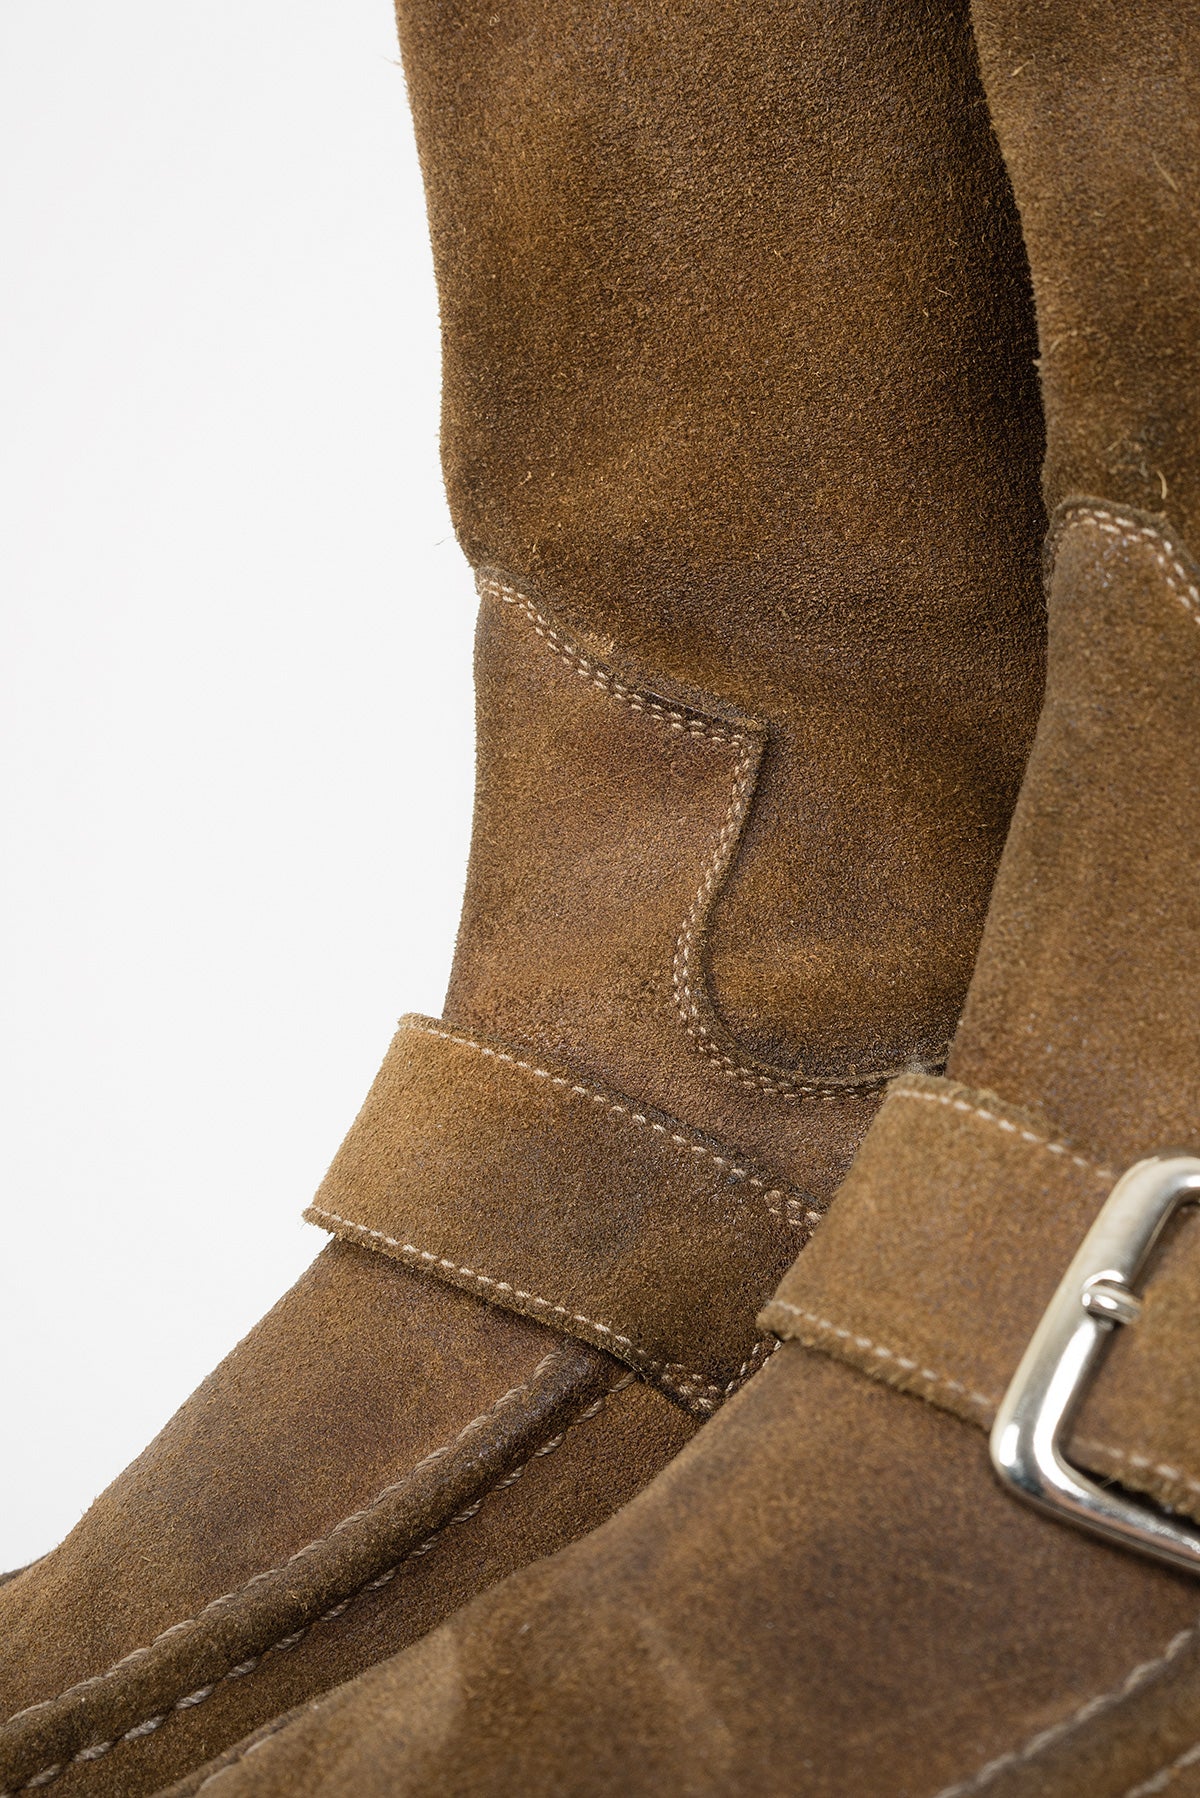 2005 A/W BUCKLE BOOTS IN AGED REVERESED LEATHER